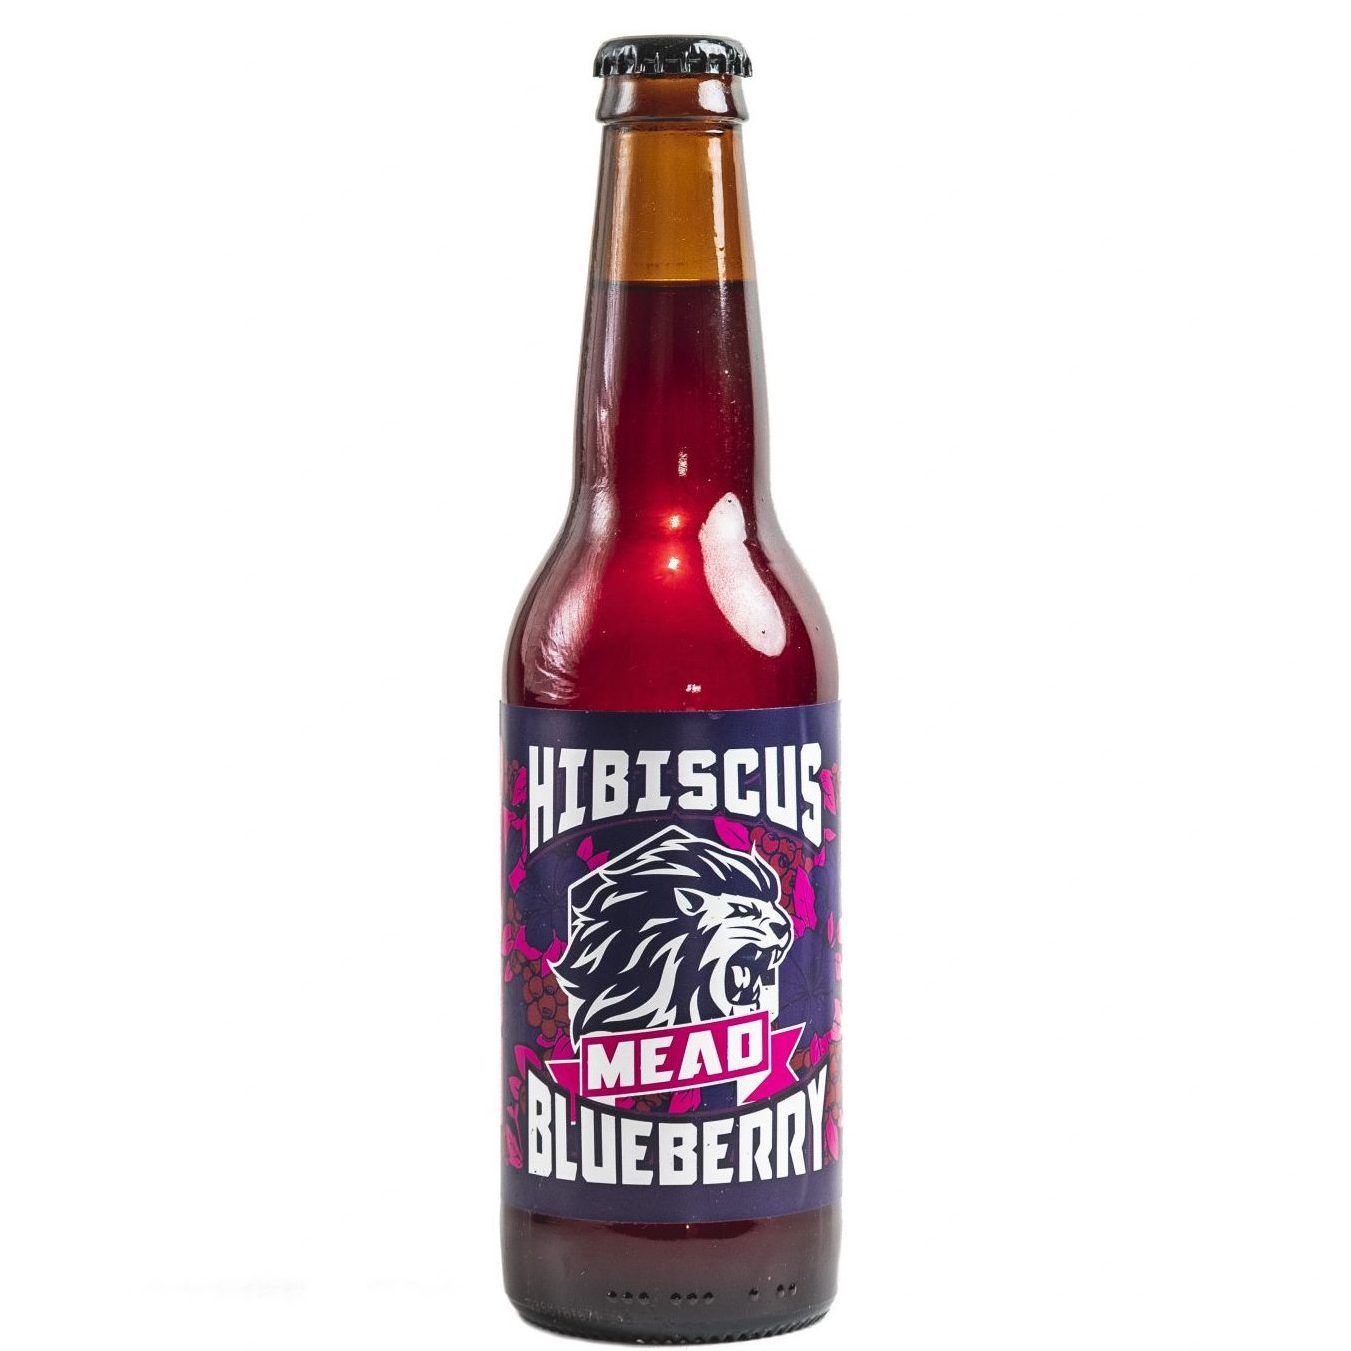 Lion City Meadery Hibiscus Blueberry Mead 330ml